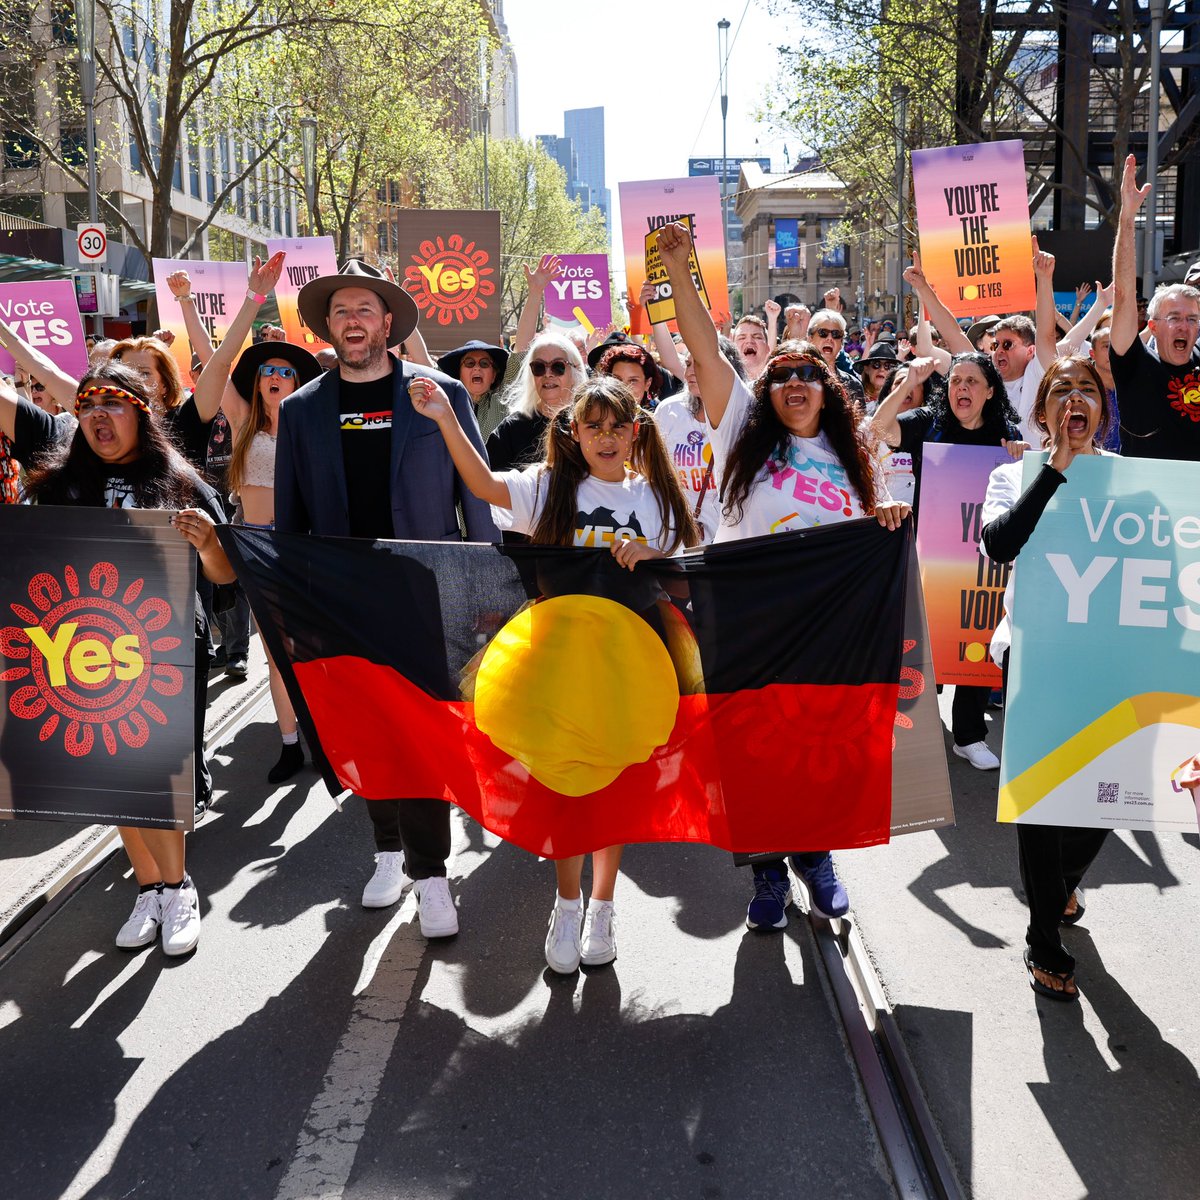 Australians are answering the invitation from Indigenous Australians through the Uluru Statement.

They’re saying Yes to recognition. 

Yes to a better future. 

And on October 14, Yes to the Voice. 

#yes23